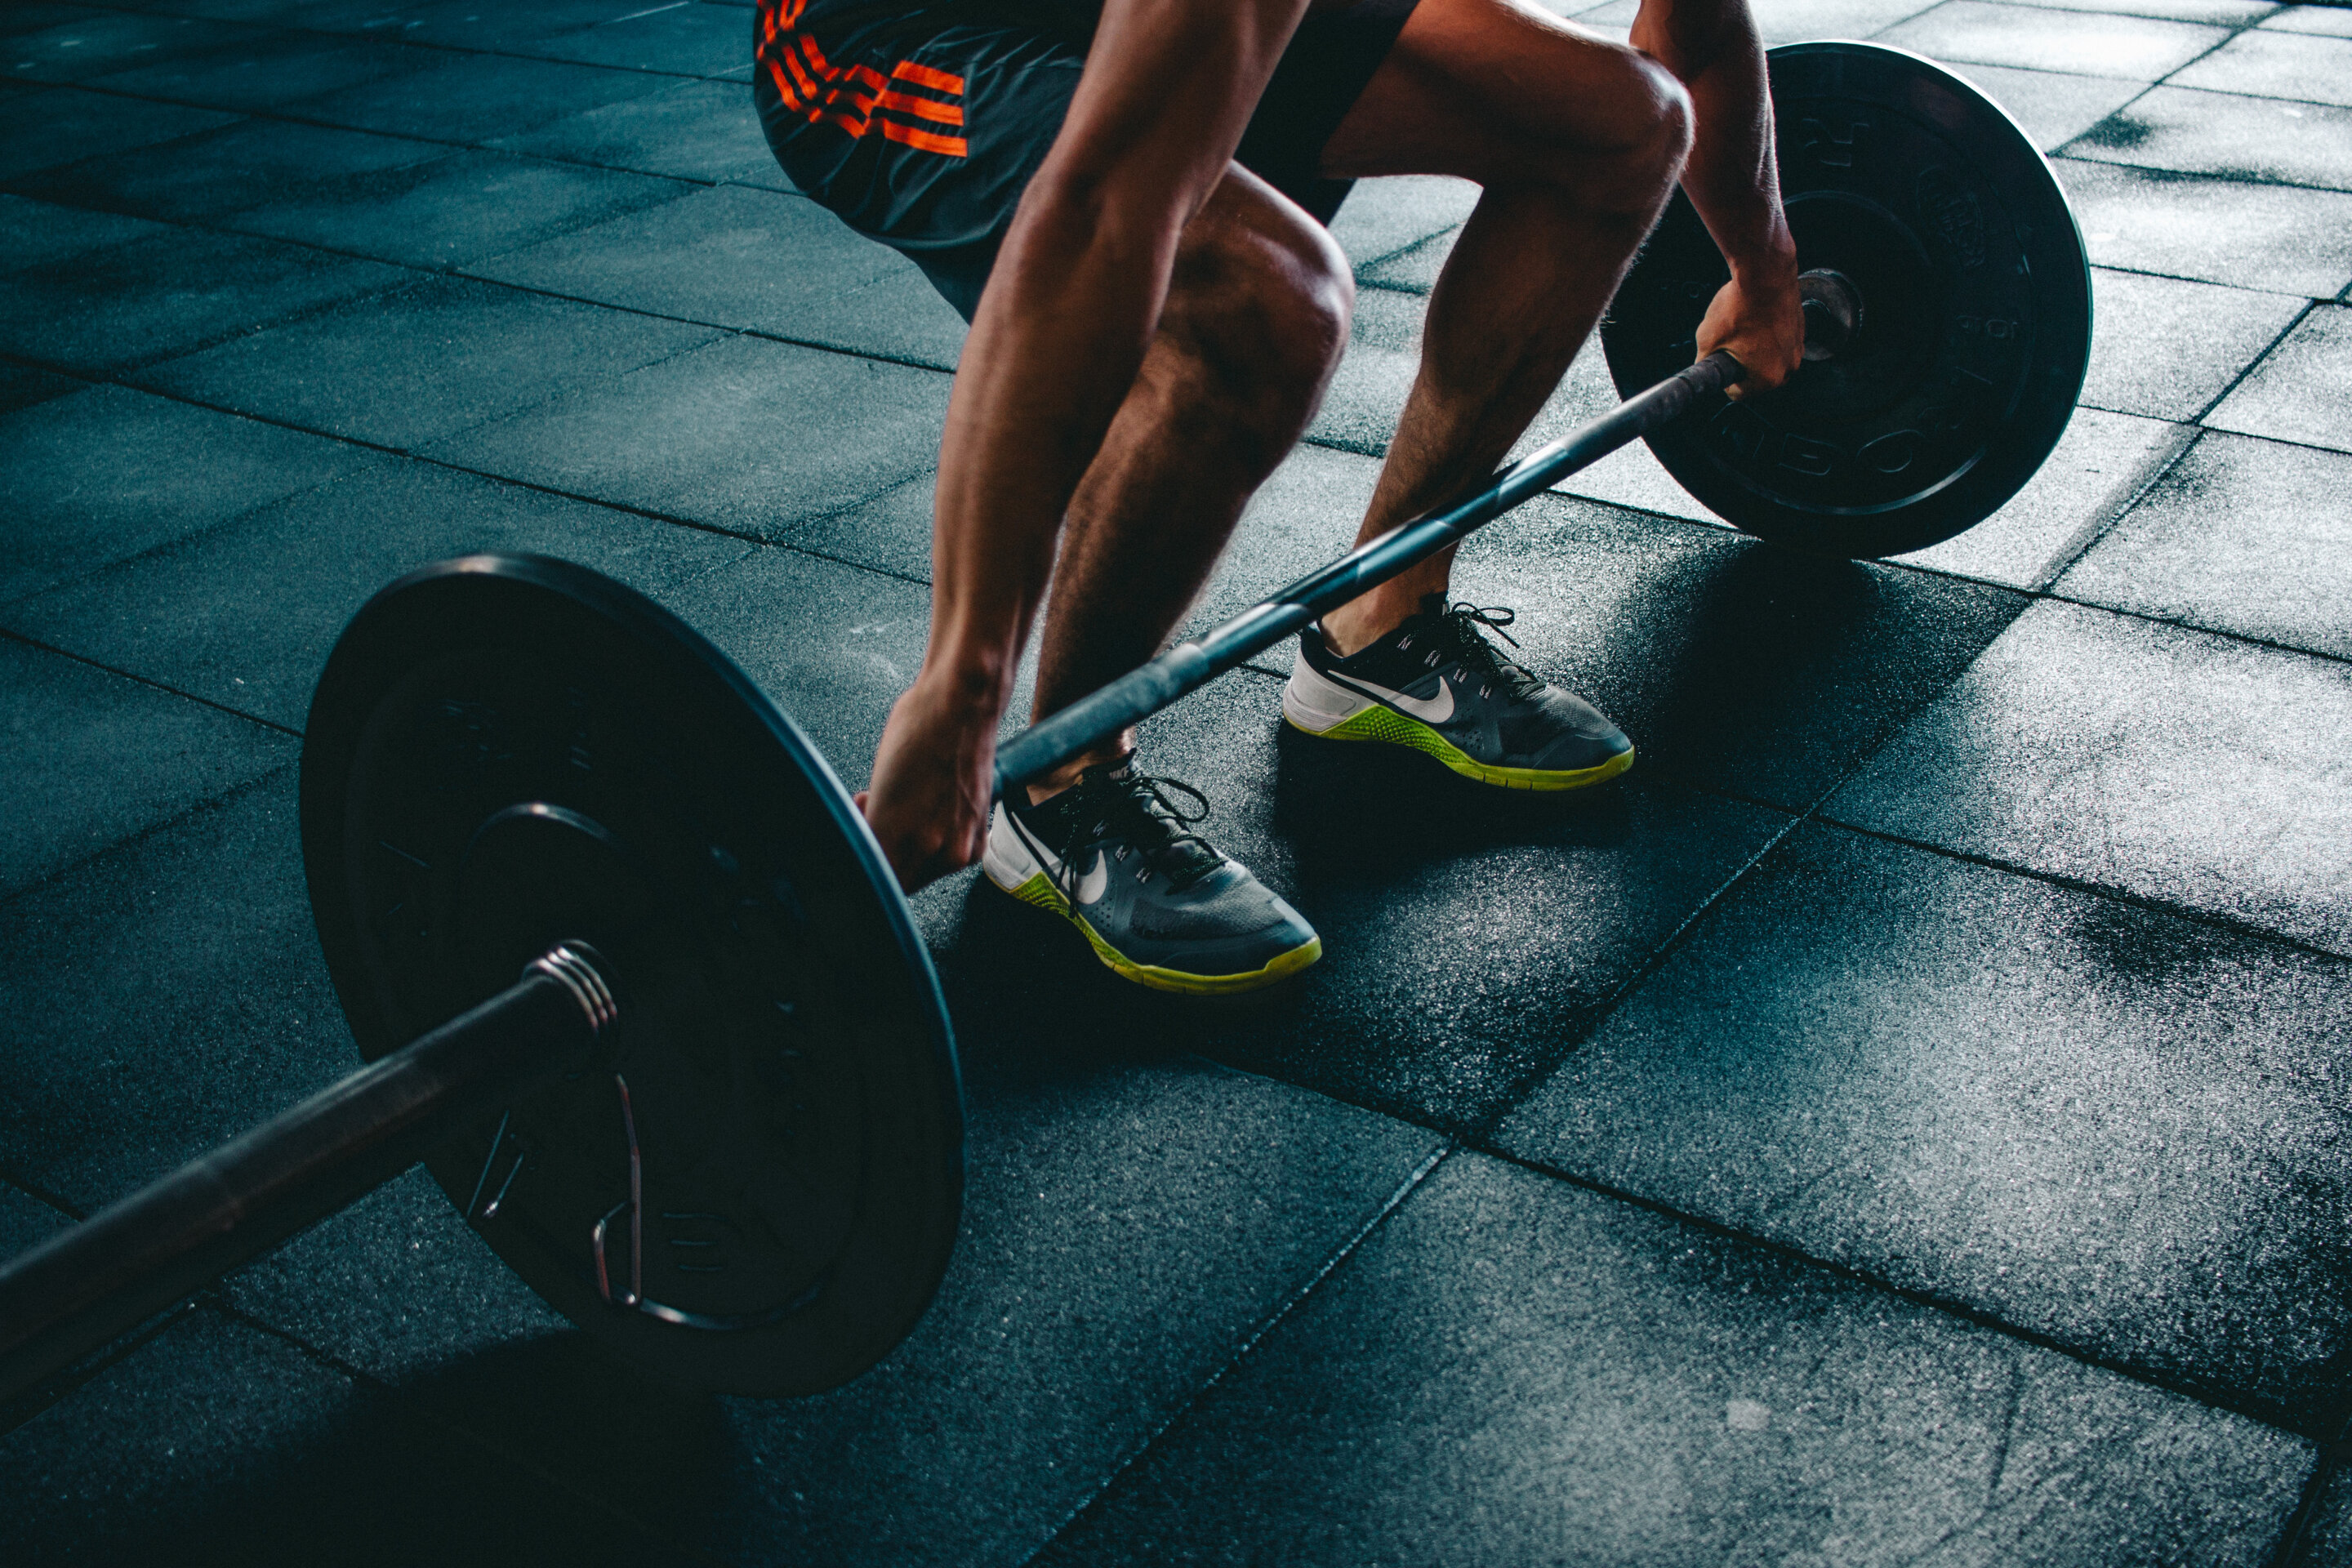 Barbell exercises aren't essential for getting fit – here's what